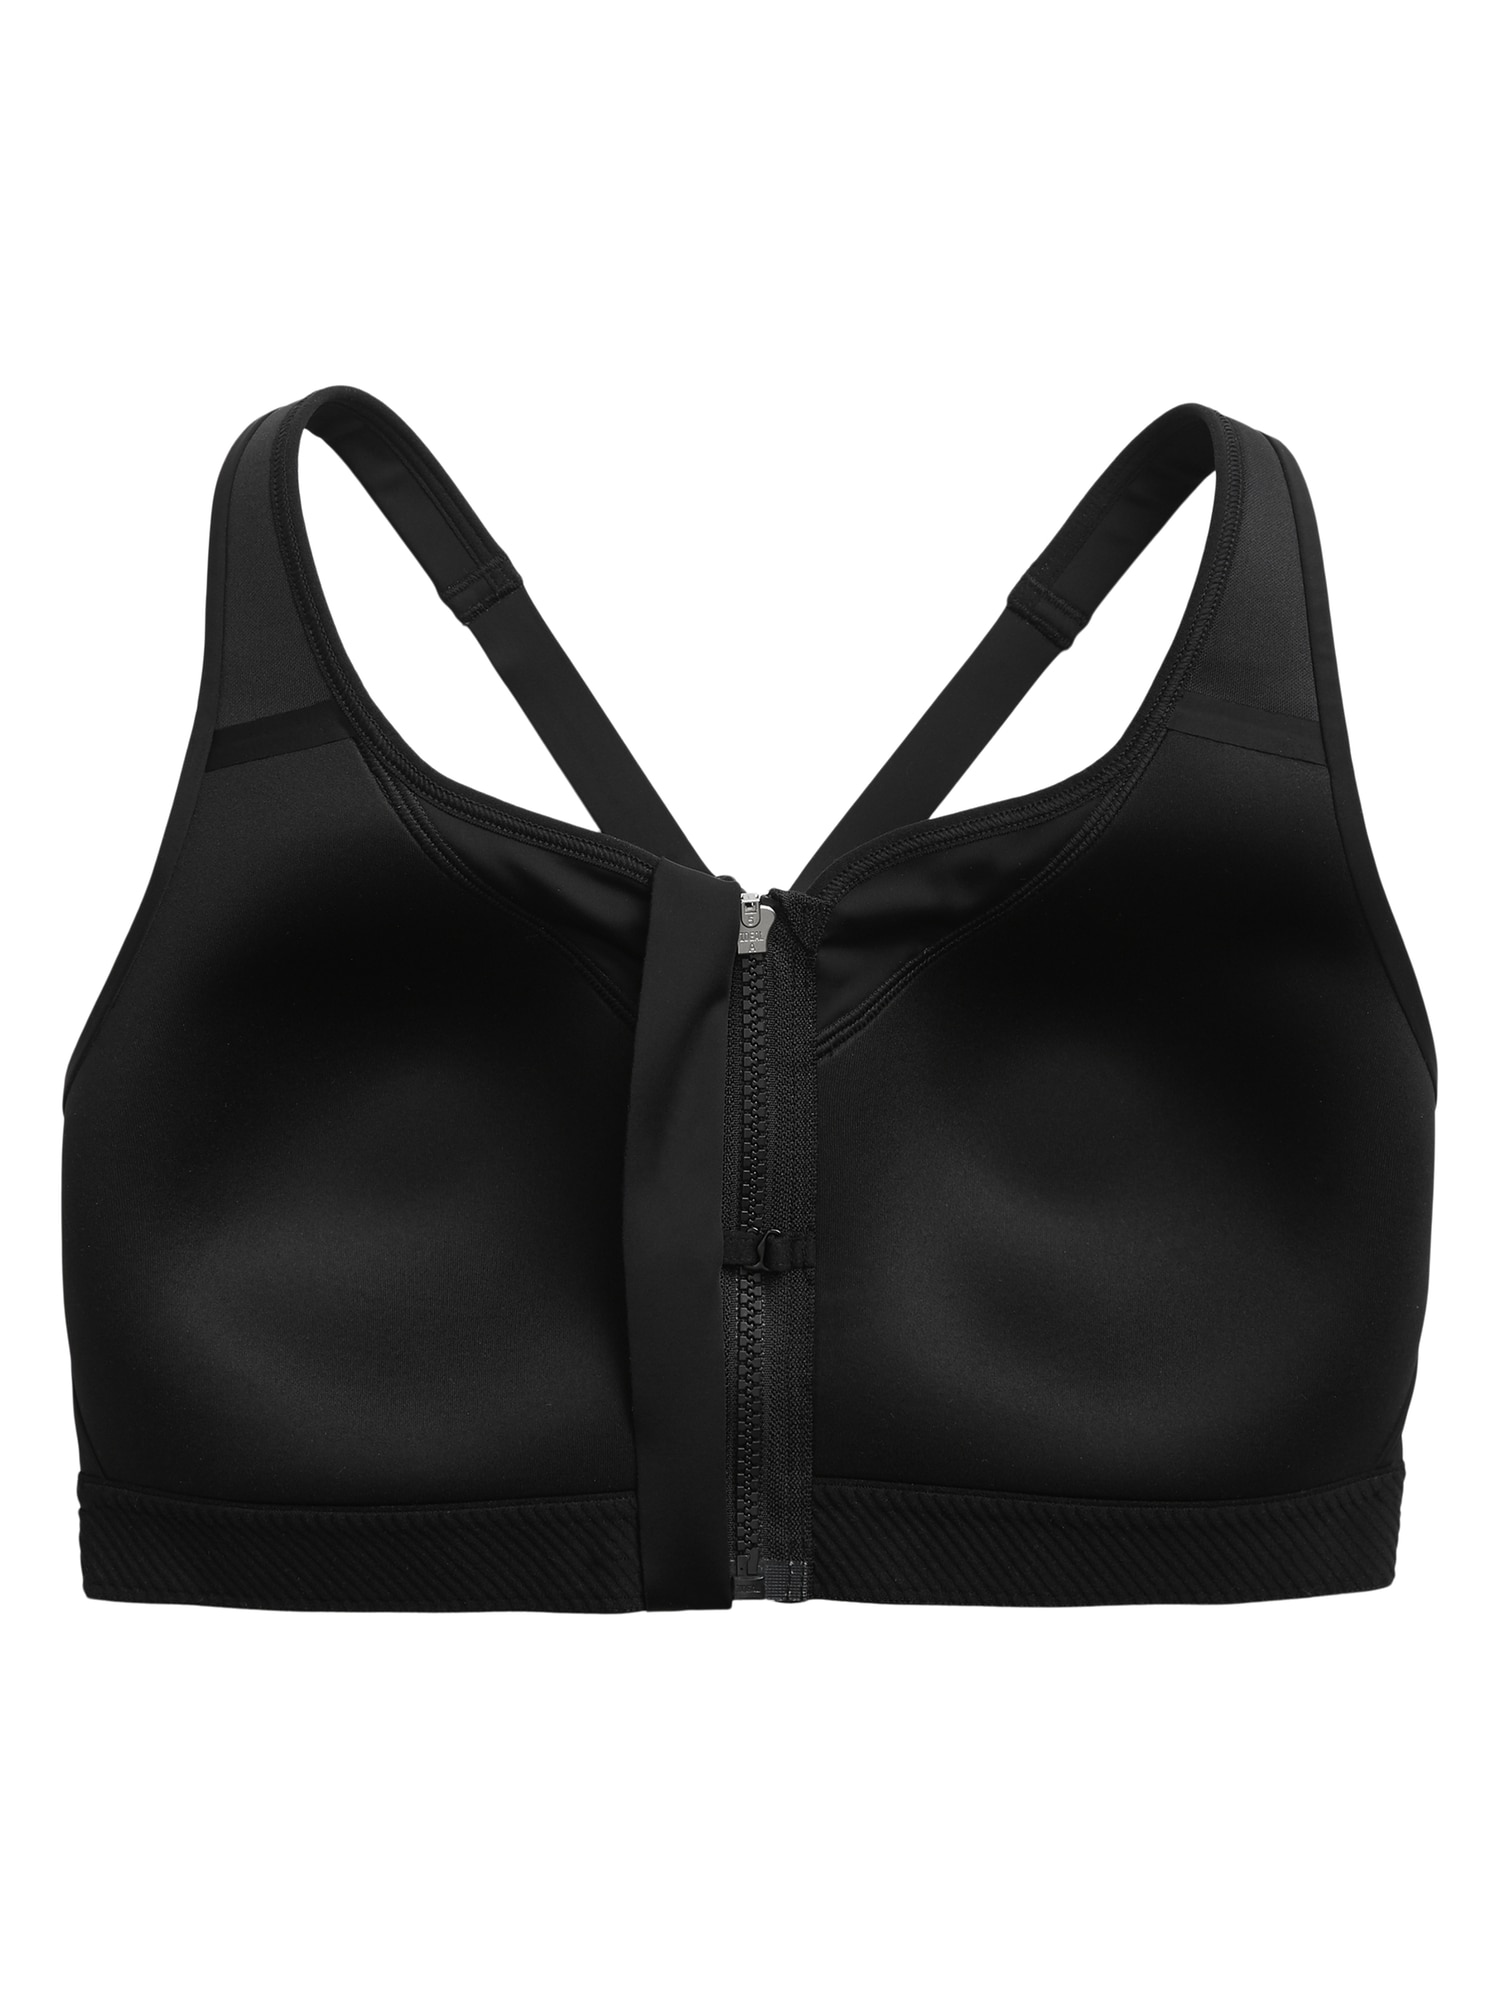 Charcoal High Impact Zip Front Sports Bra, Lingerie